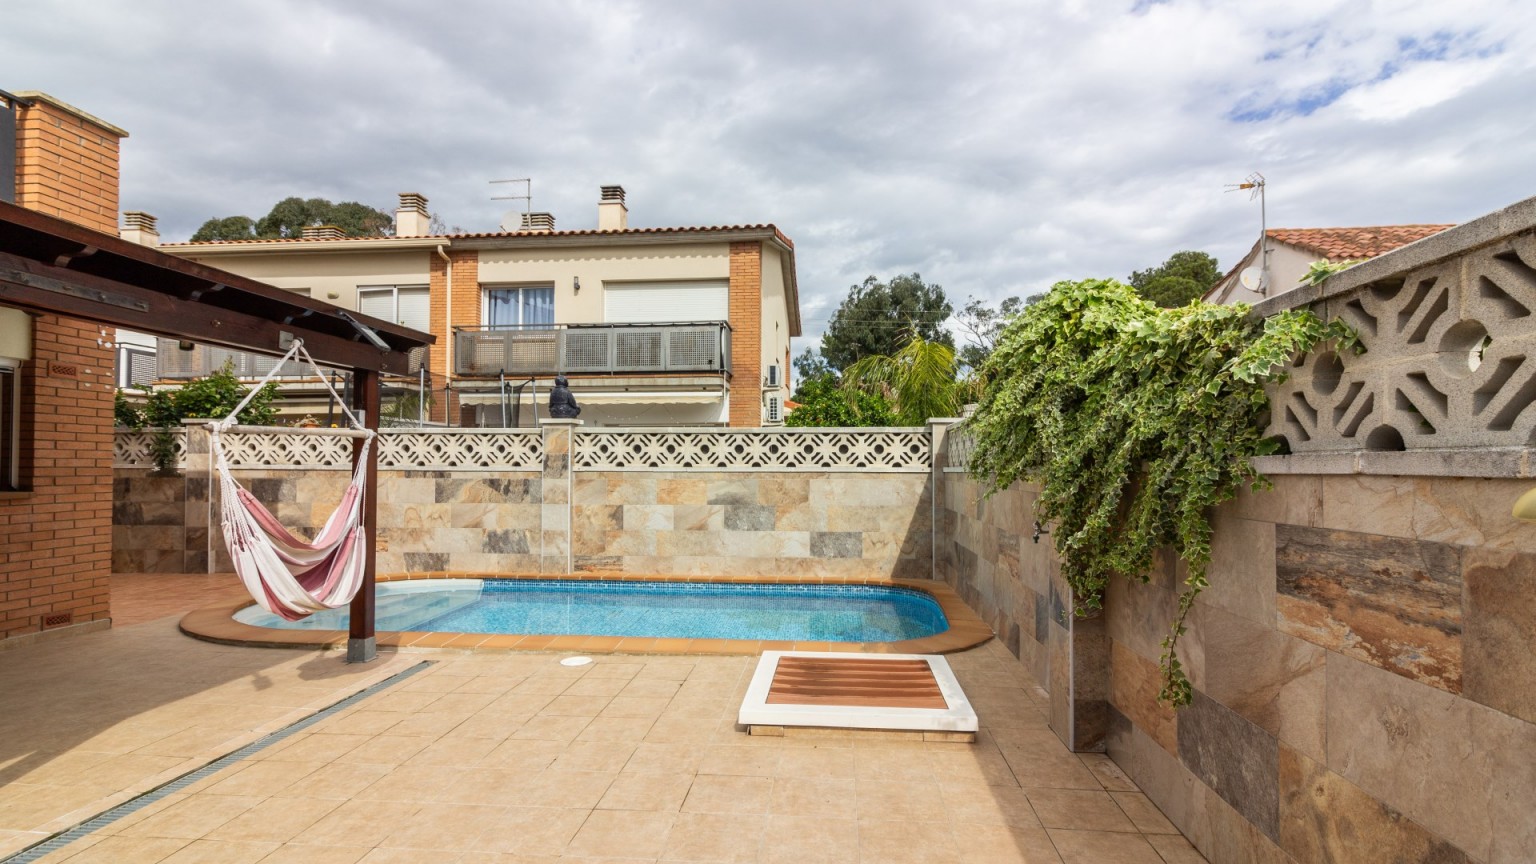 House for sale,  in Mas Matas, with three bedrooms, garage and private pool.